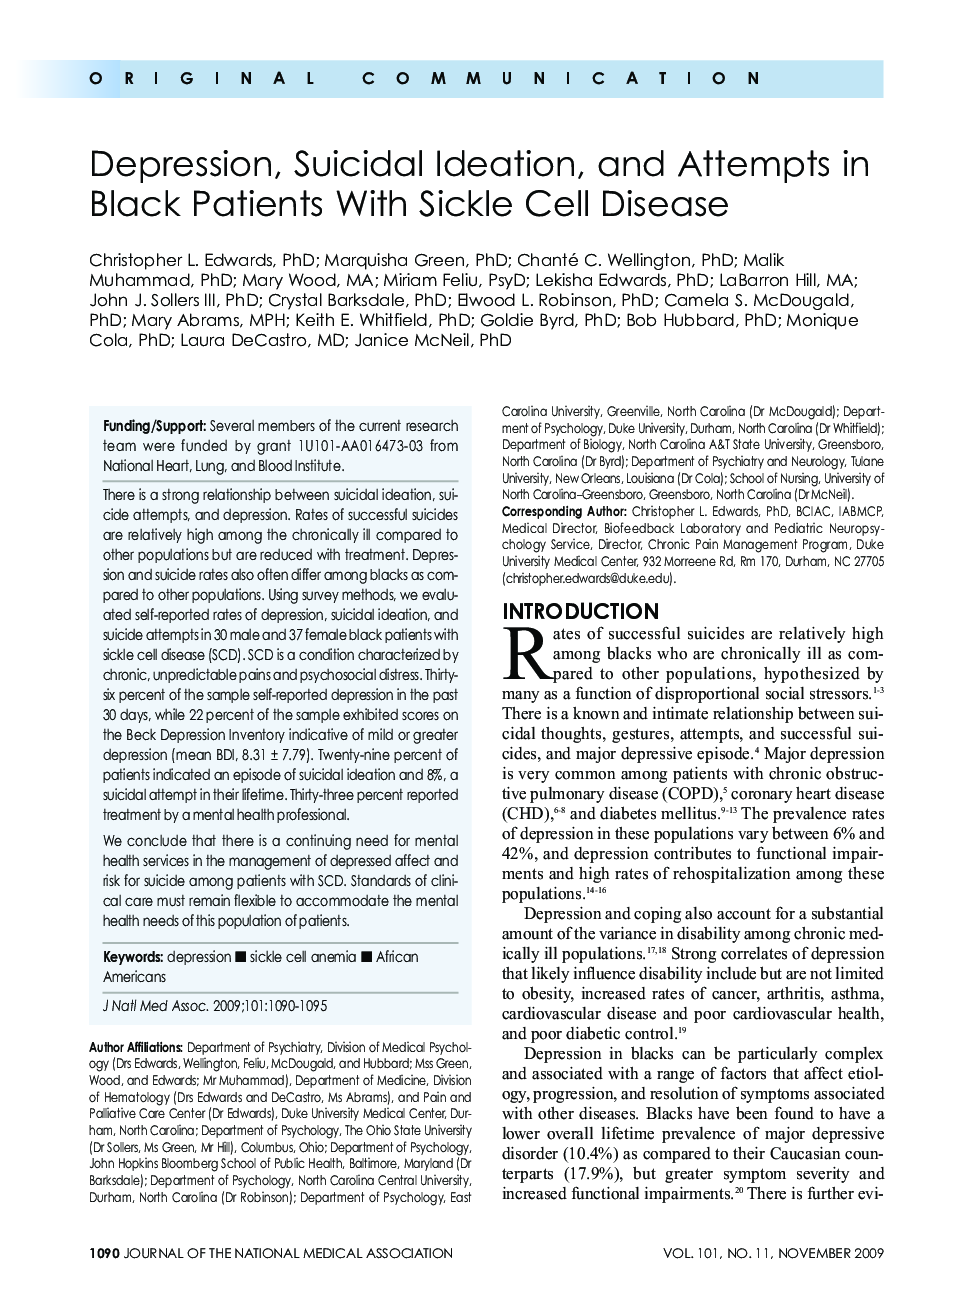 Depression, Suicidal Ideation, and Attempts in Black Patients With Sickle Cell Disease